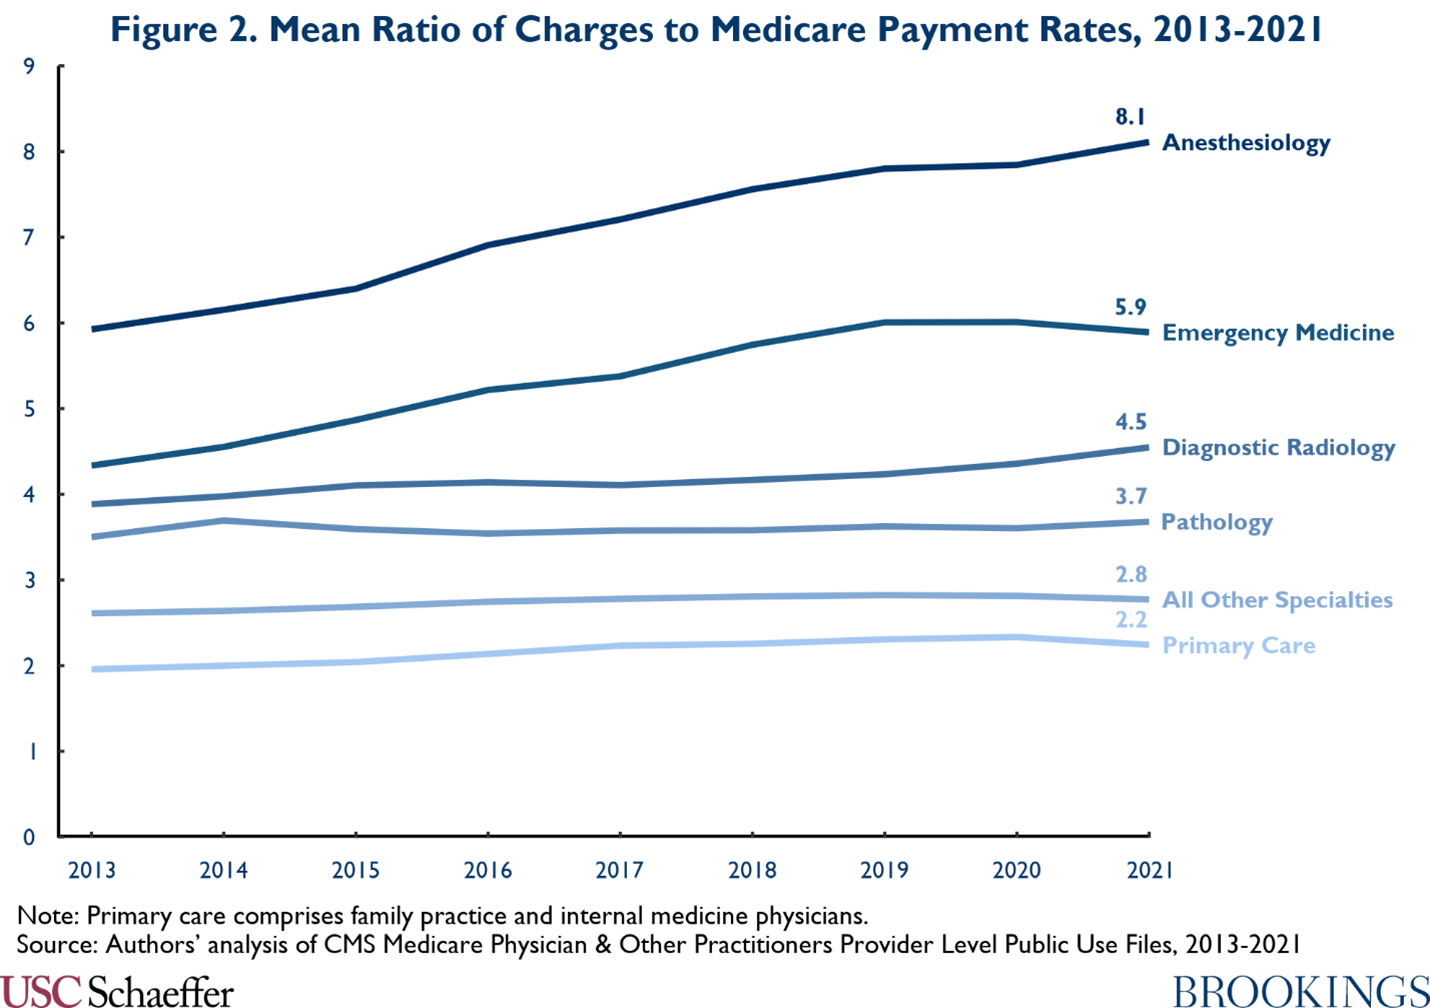 Figure 2. Mean Ratio of Charges to Medicare Payment Rates, 2013-2021